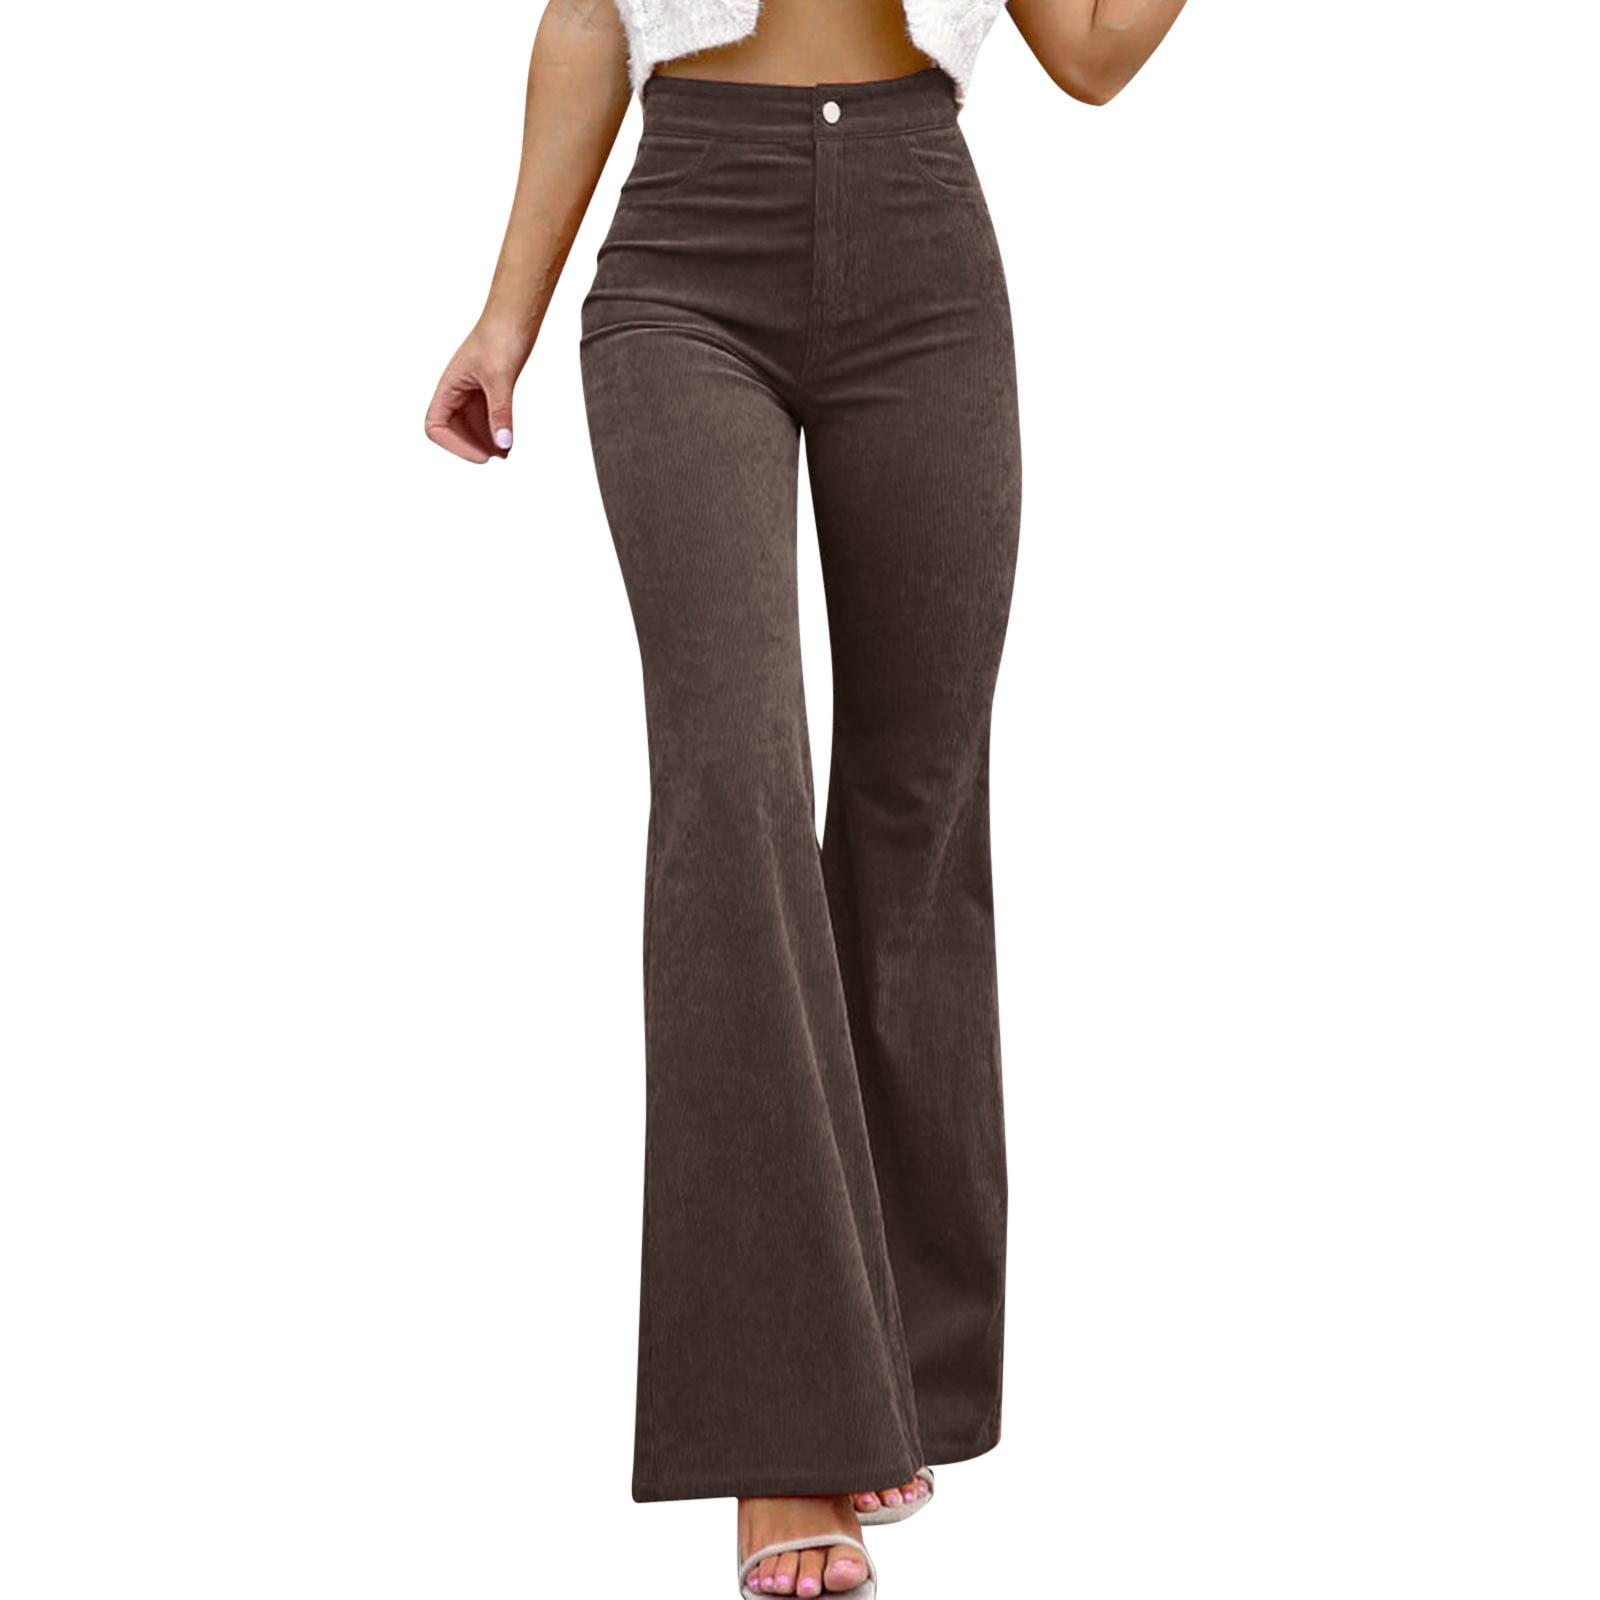 Brglopf Women's Dress Pants High Waist Pull-on Stretchy Pants Solid Color  Straight Wide Leg Slacks with Pockets for Business Casual 